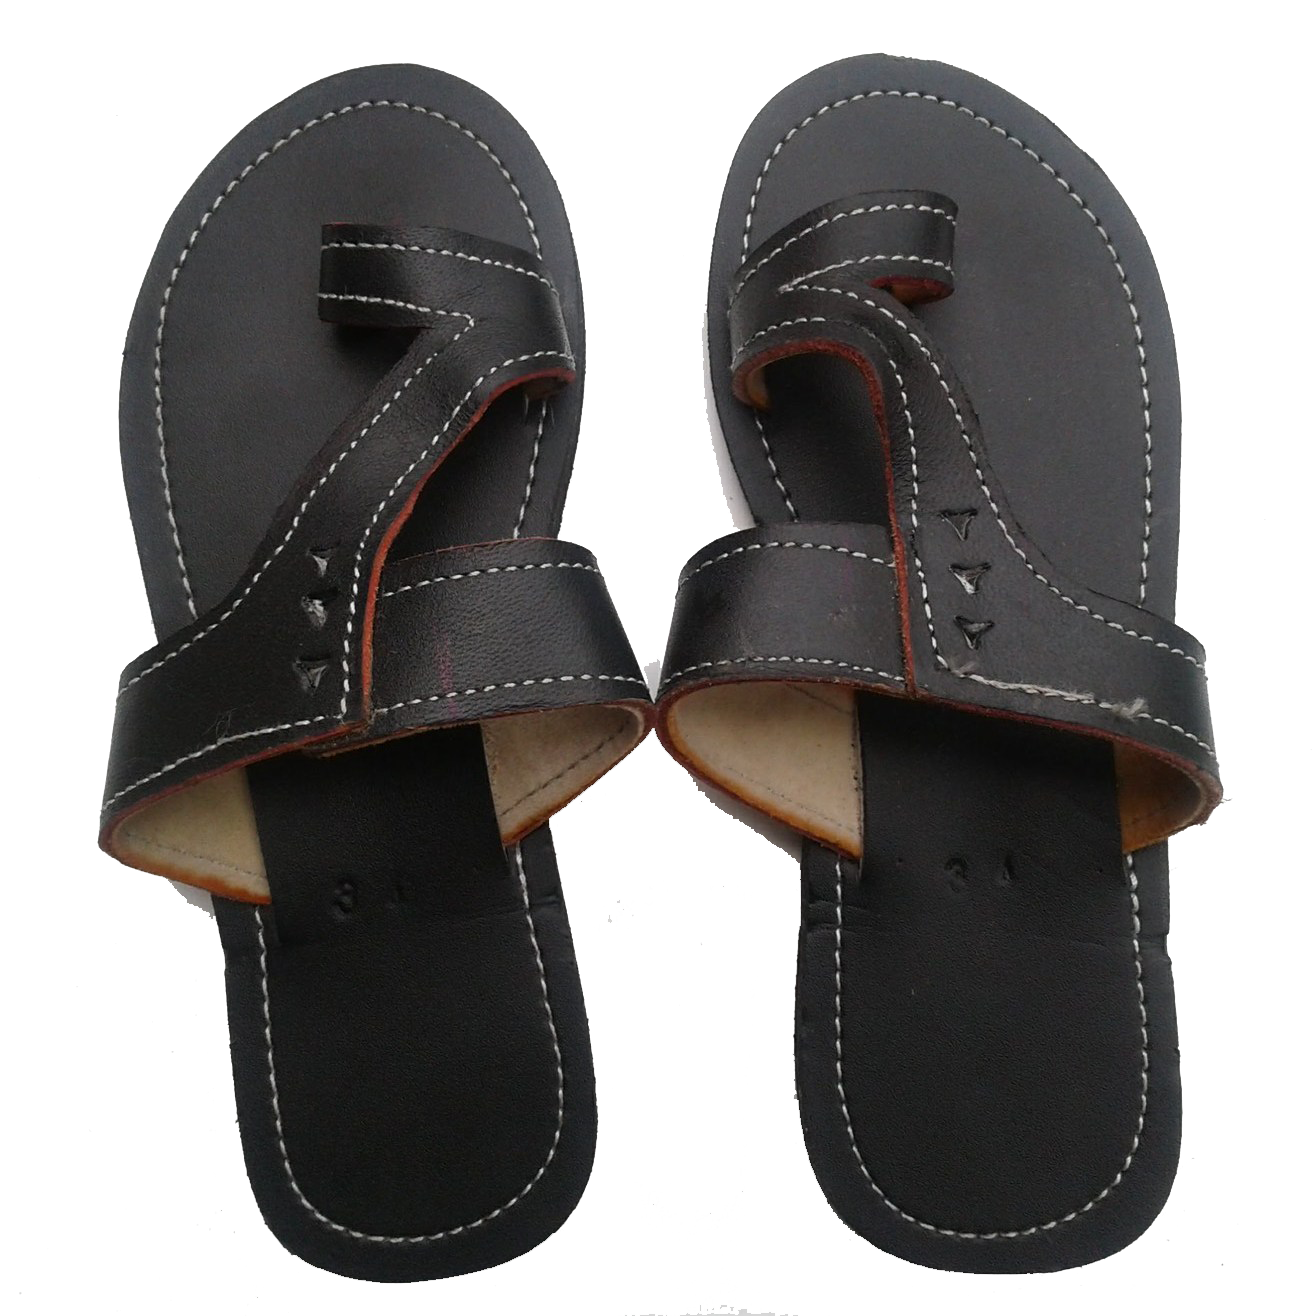 Boys leather sandals - My African Gold